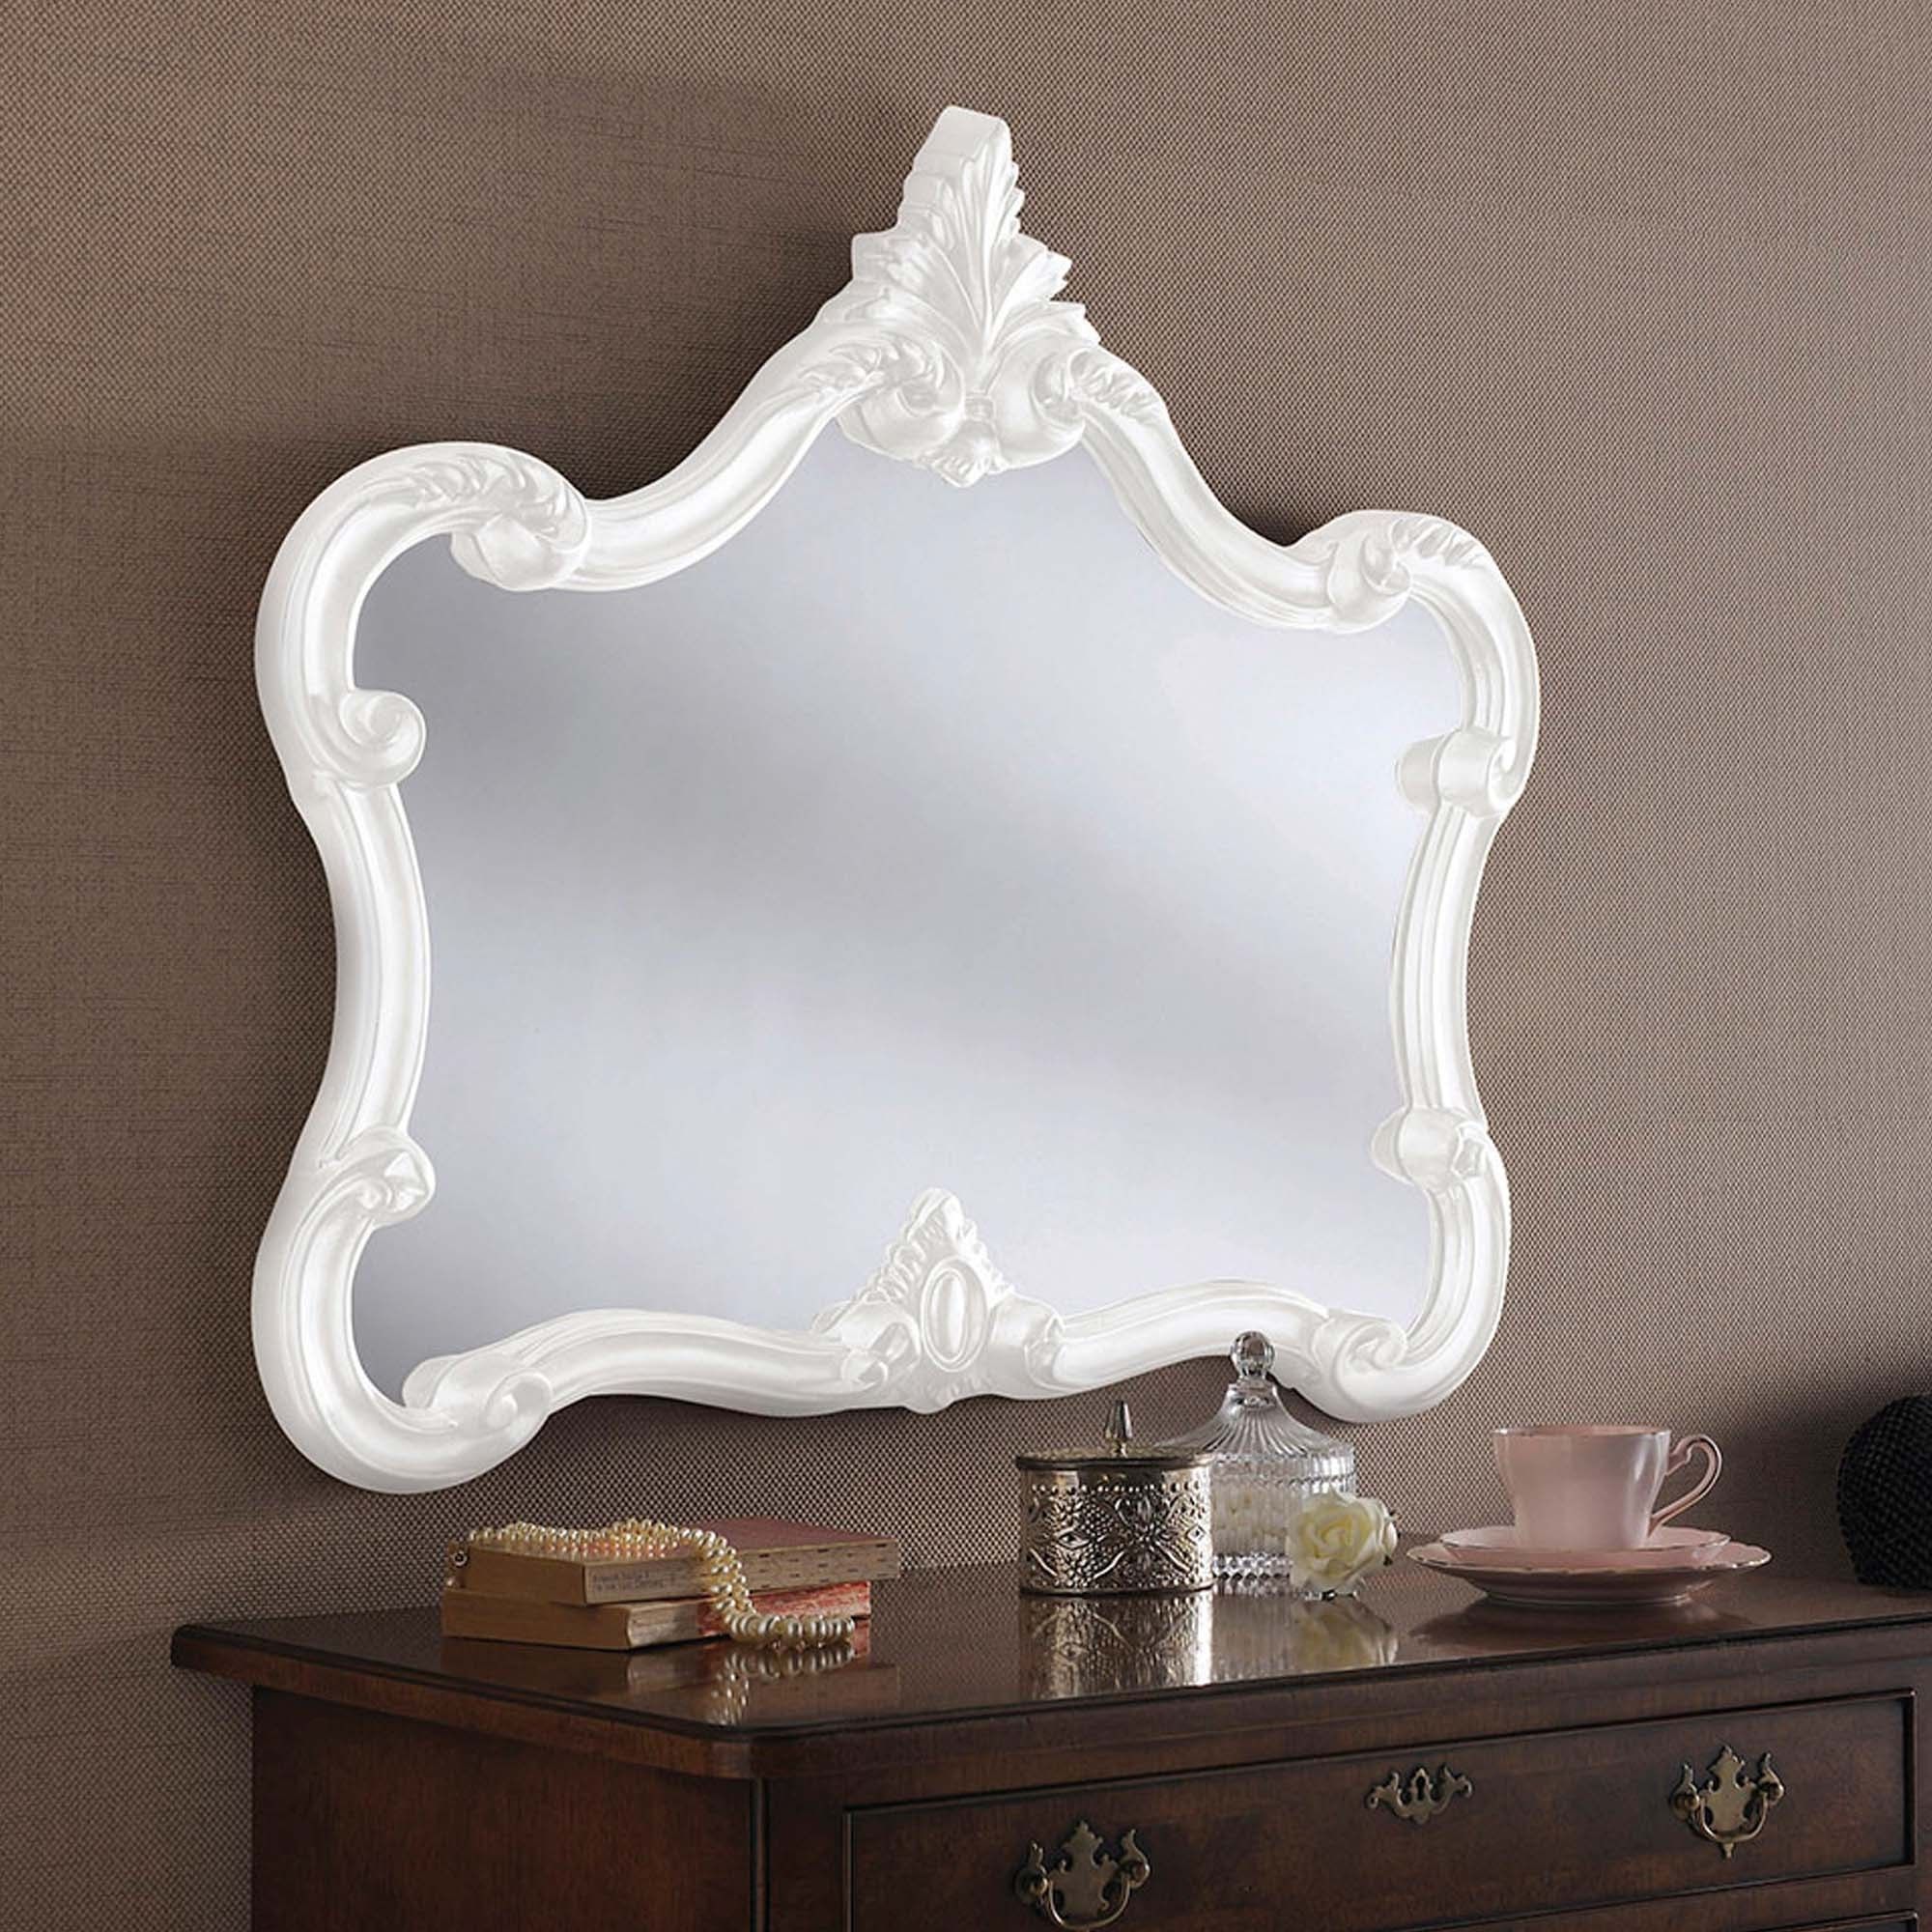 Antique French Style White Ornate Wall Mirror | Wall Mirrors Regarding Antiqued Glass Wall Mirrors (View 6 of 15)